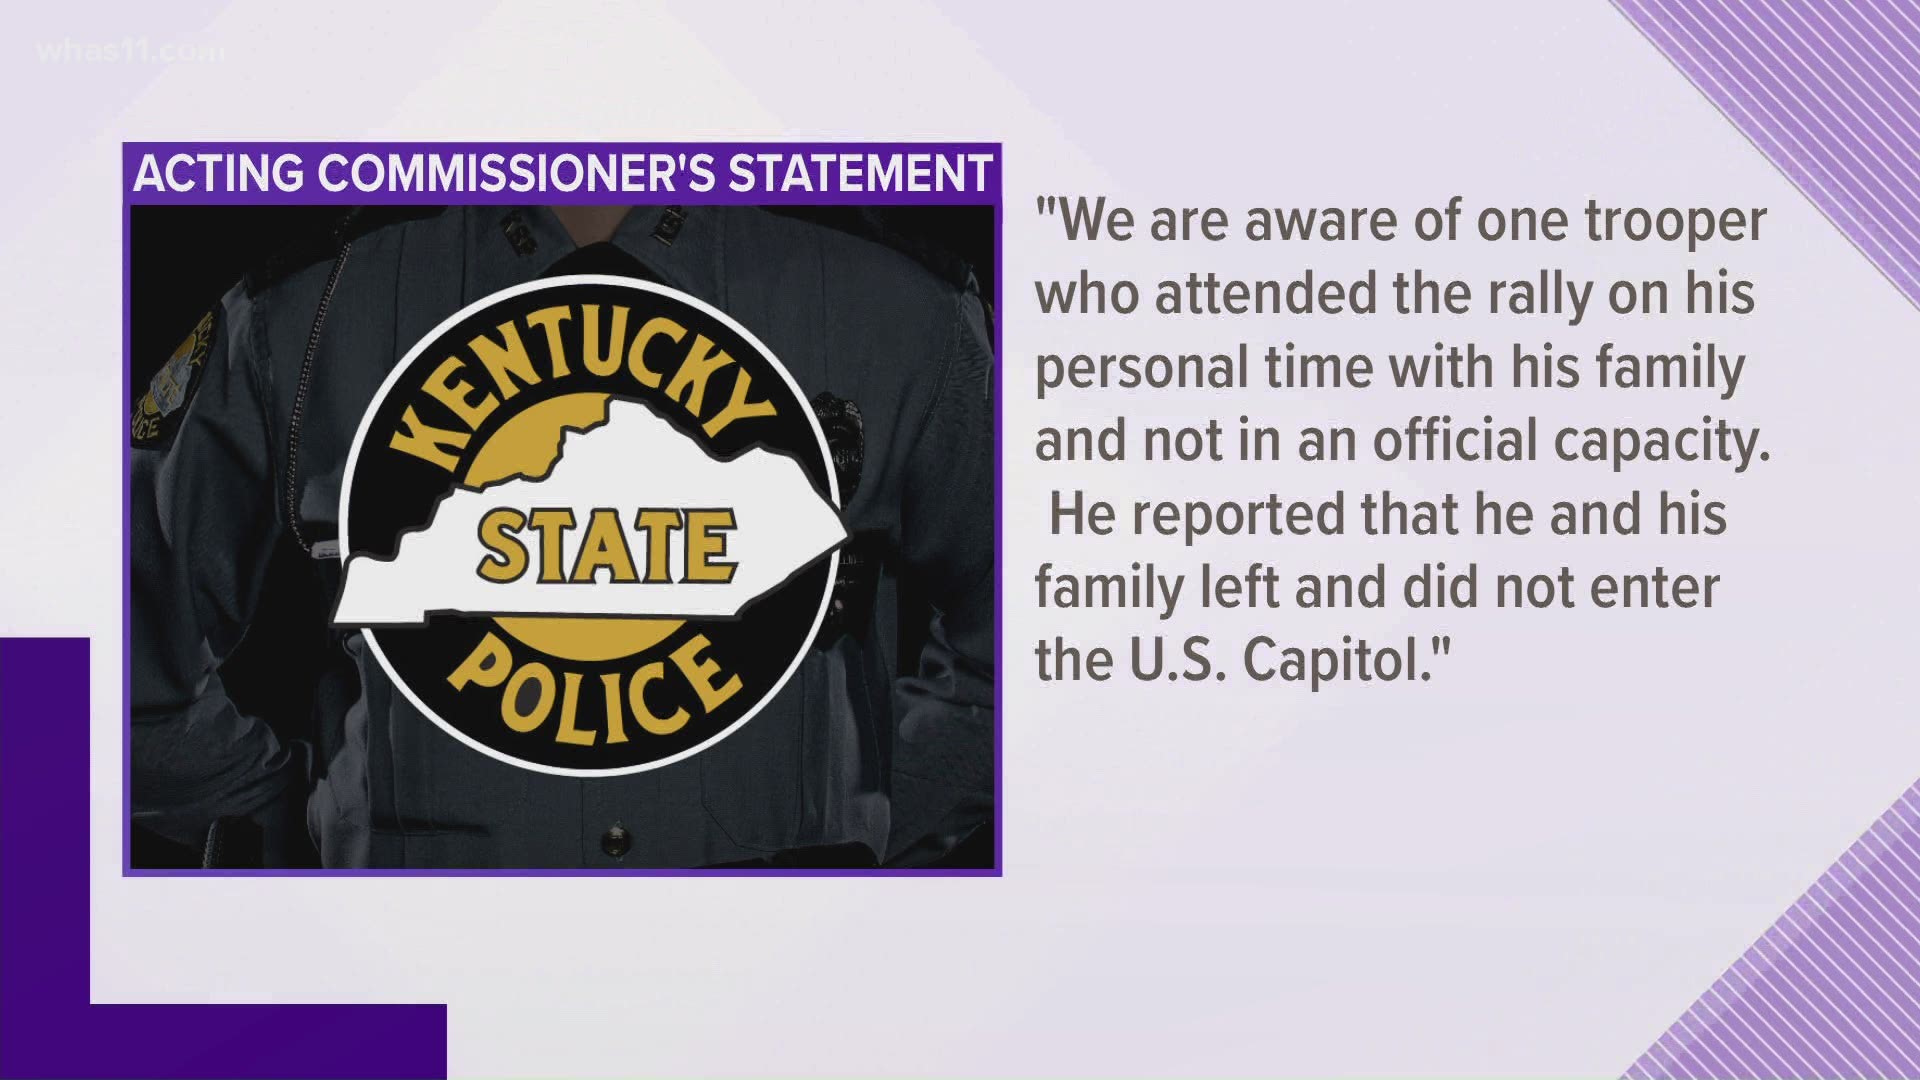 A Kentucky state trooper has been reassigned after admitting he and his family attended the US Capitol rally. The trooper said he didn't enter the building.